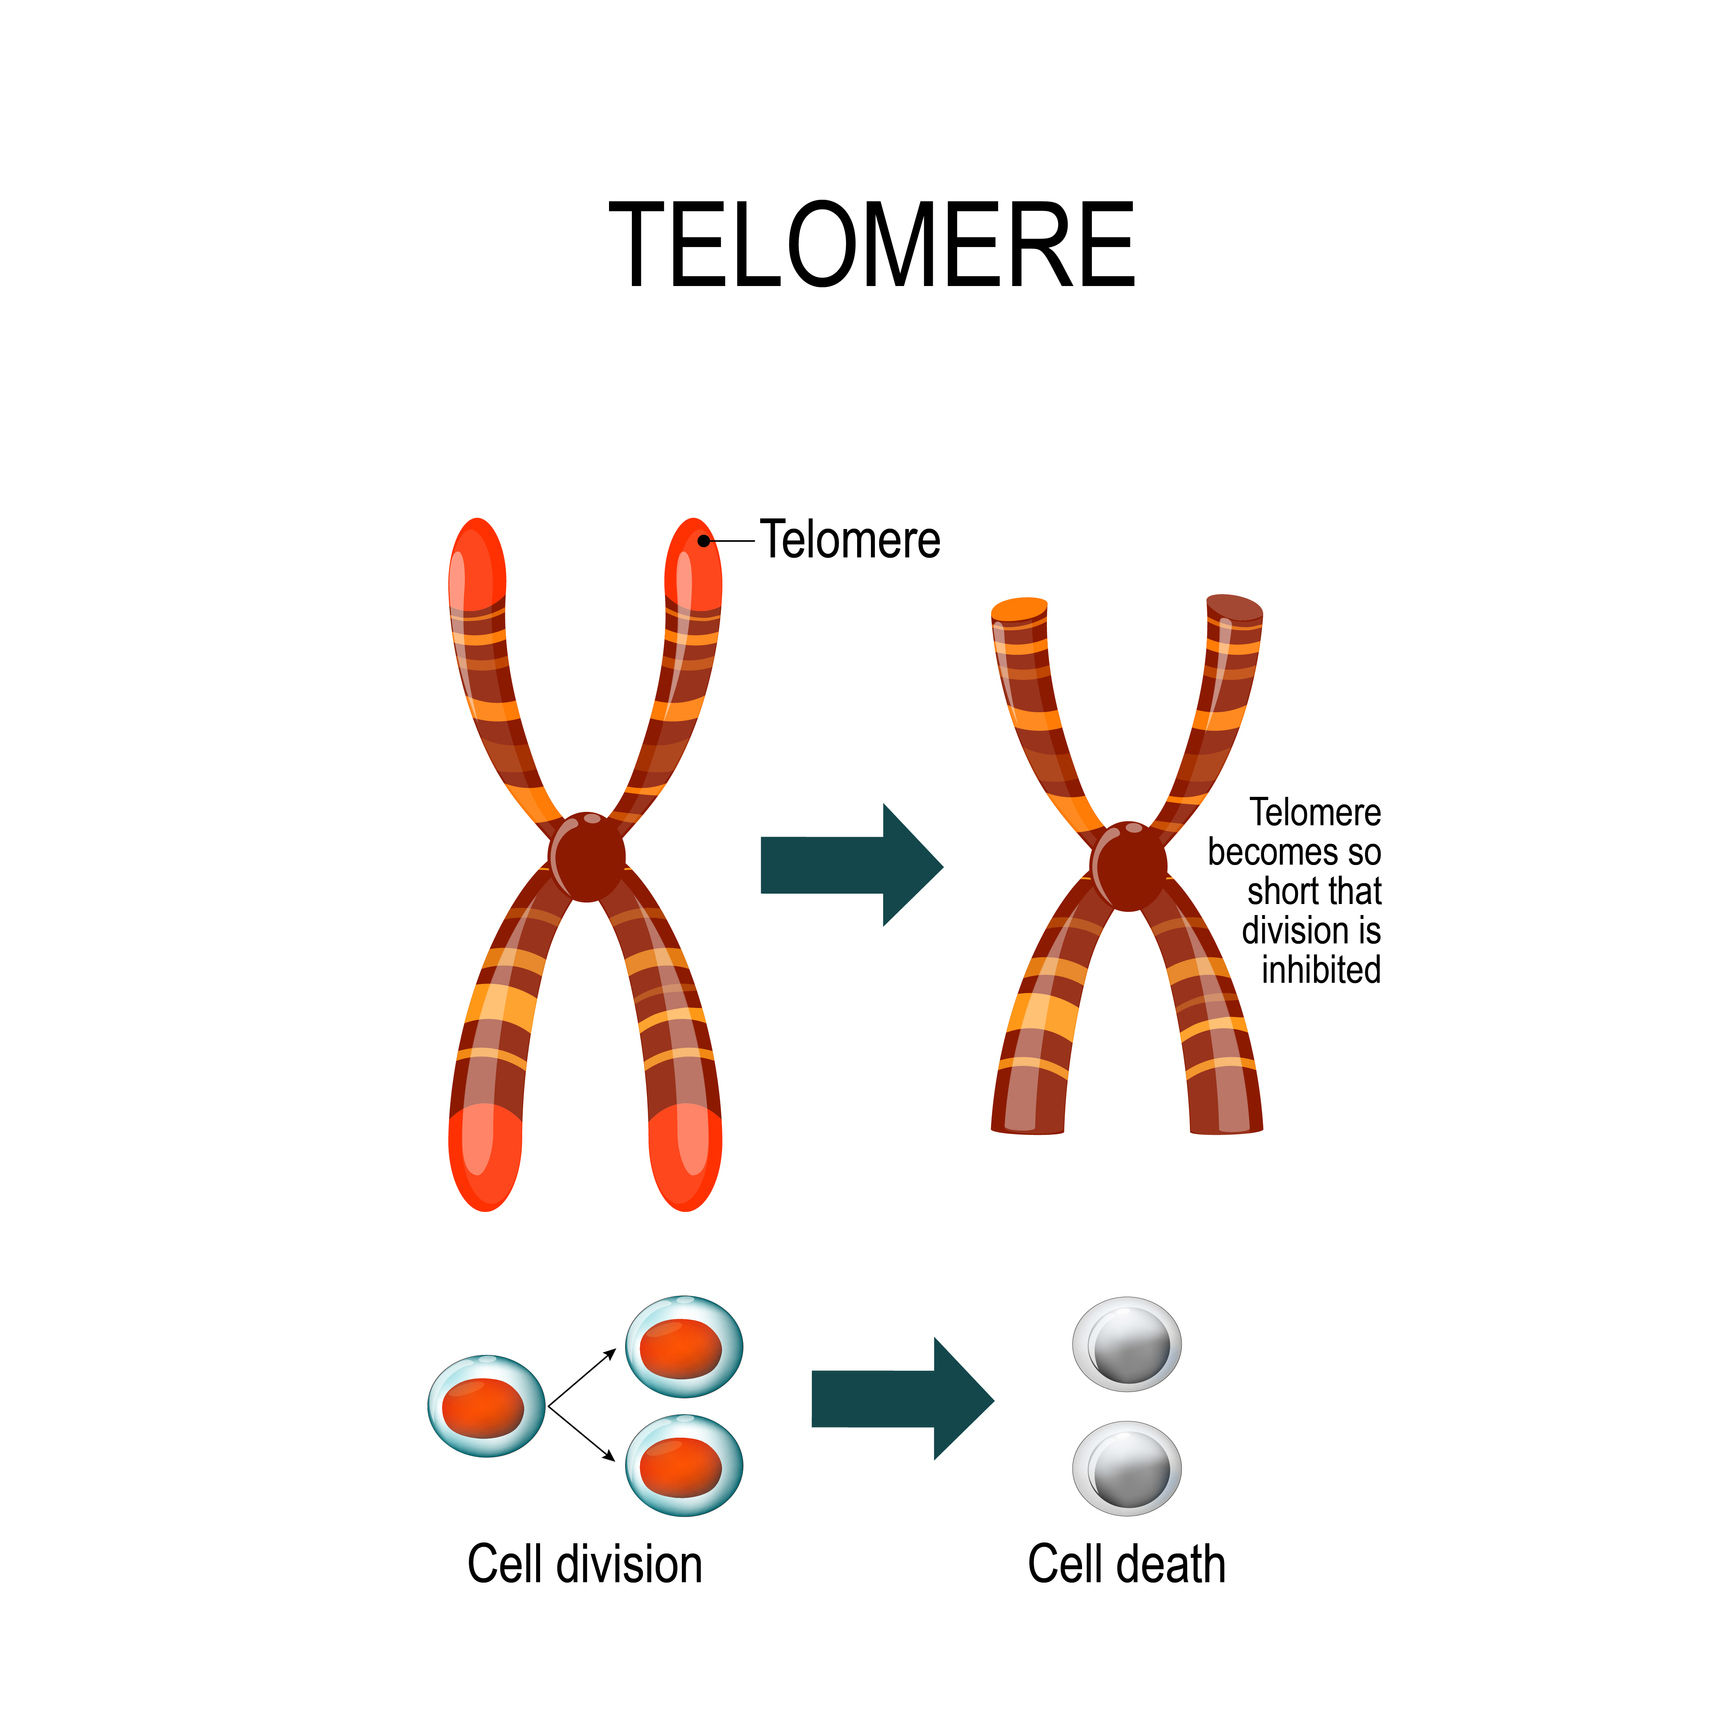 telomere getty images